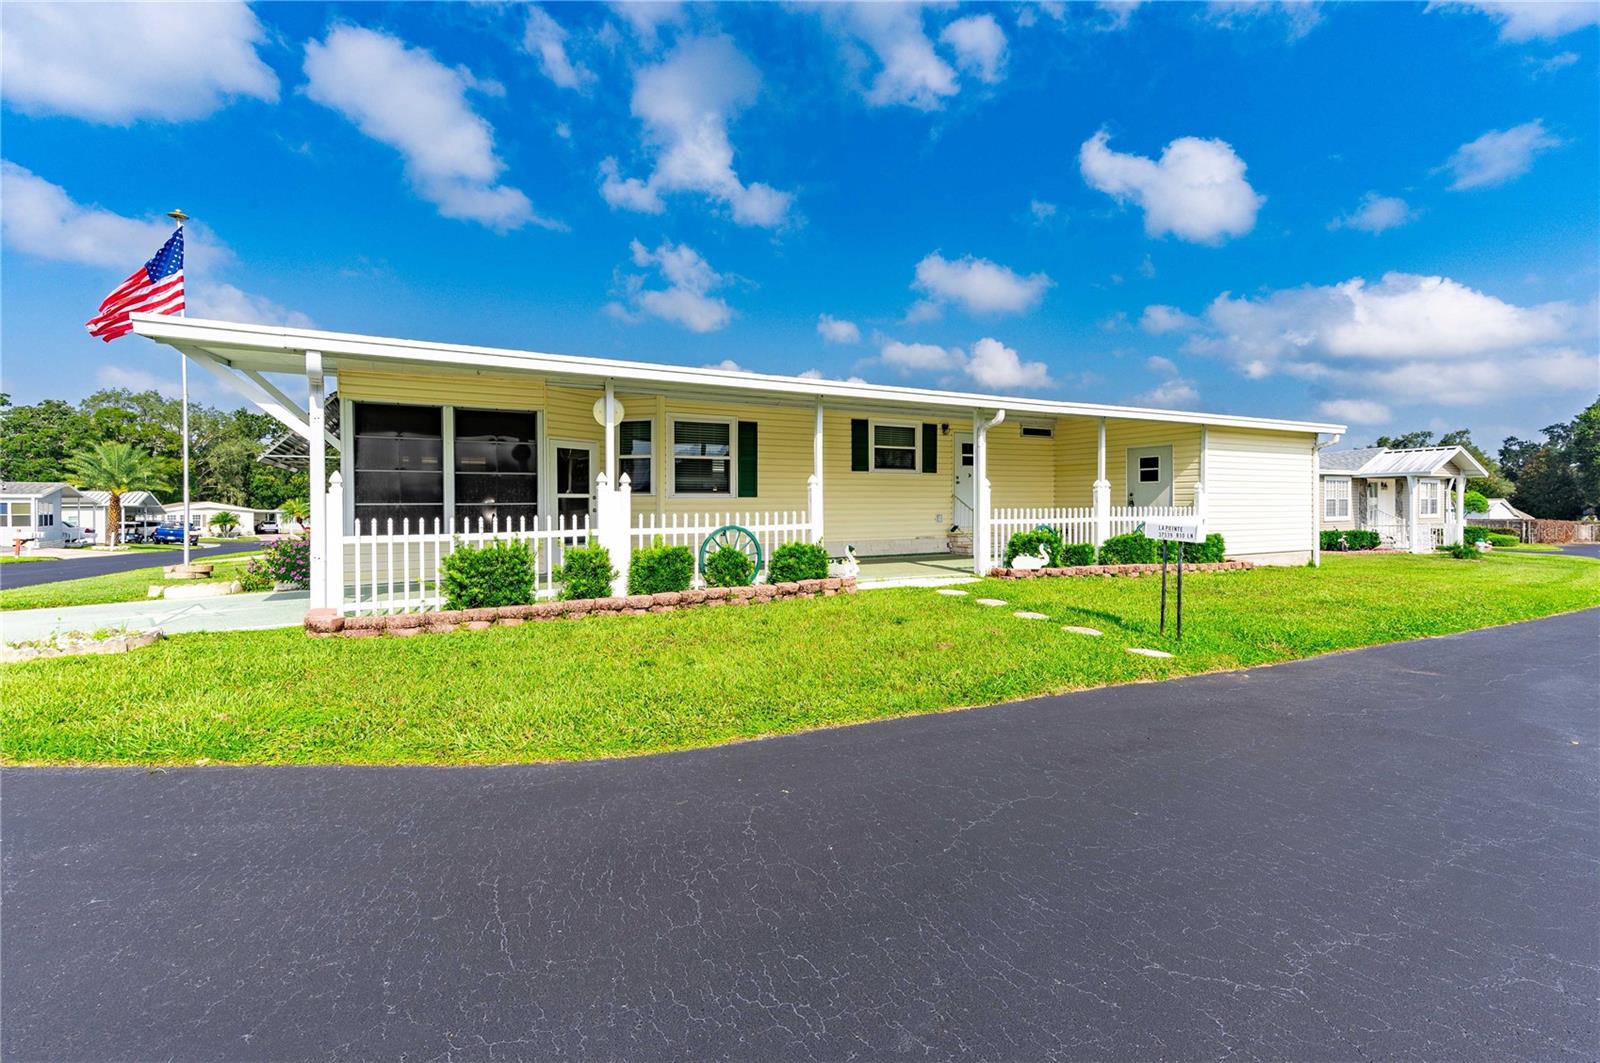 This corner lot home is across the road from club house, pool, and indoor shuffle.